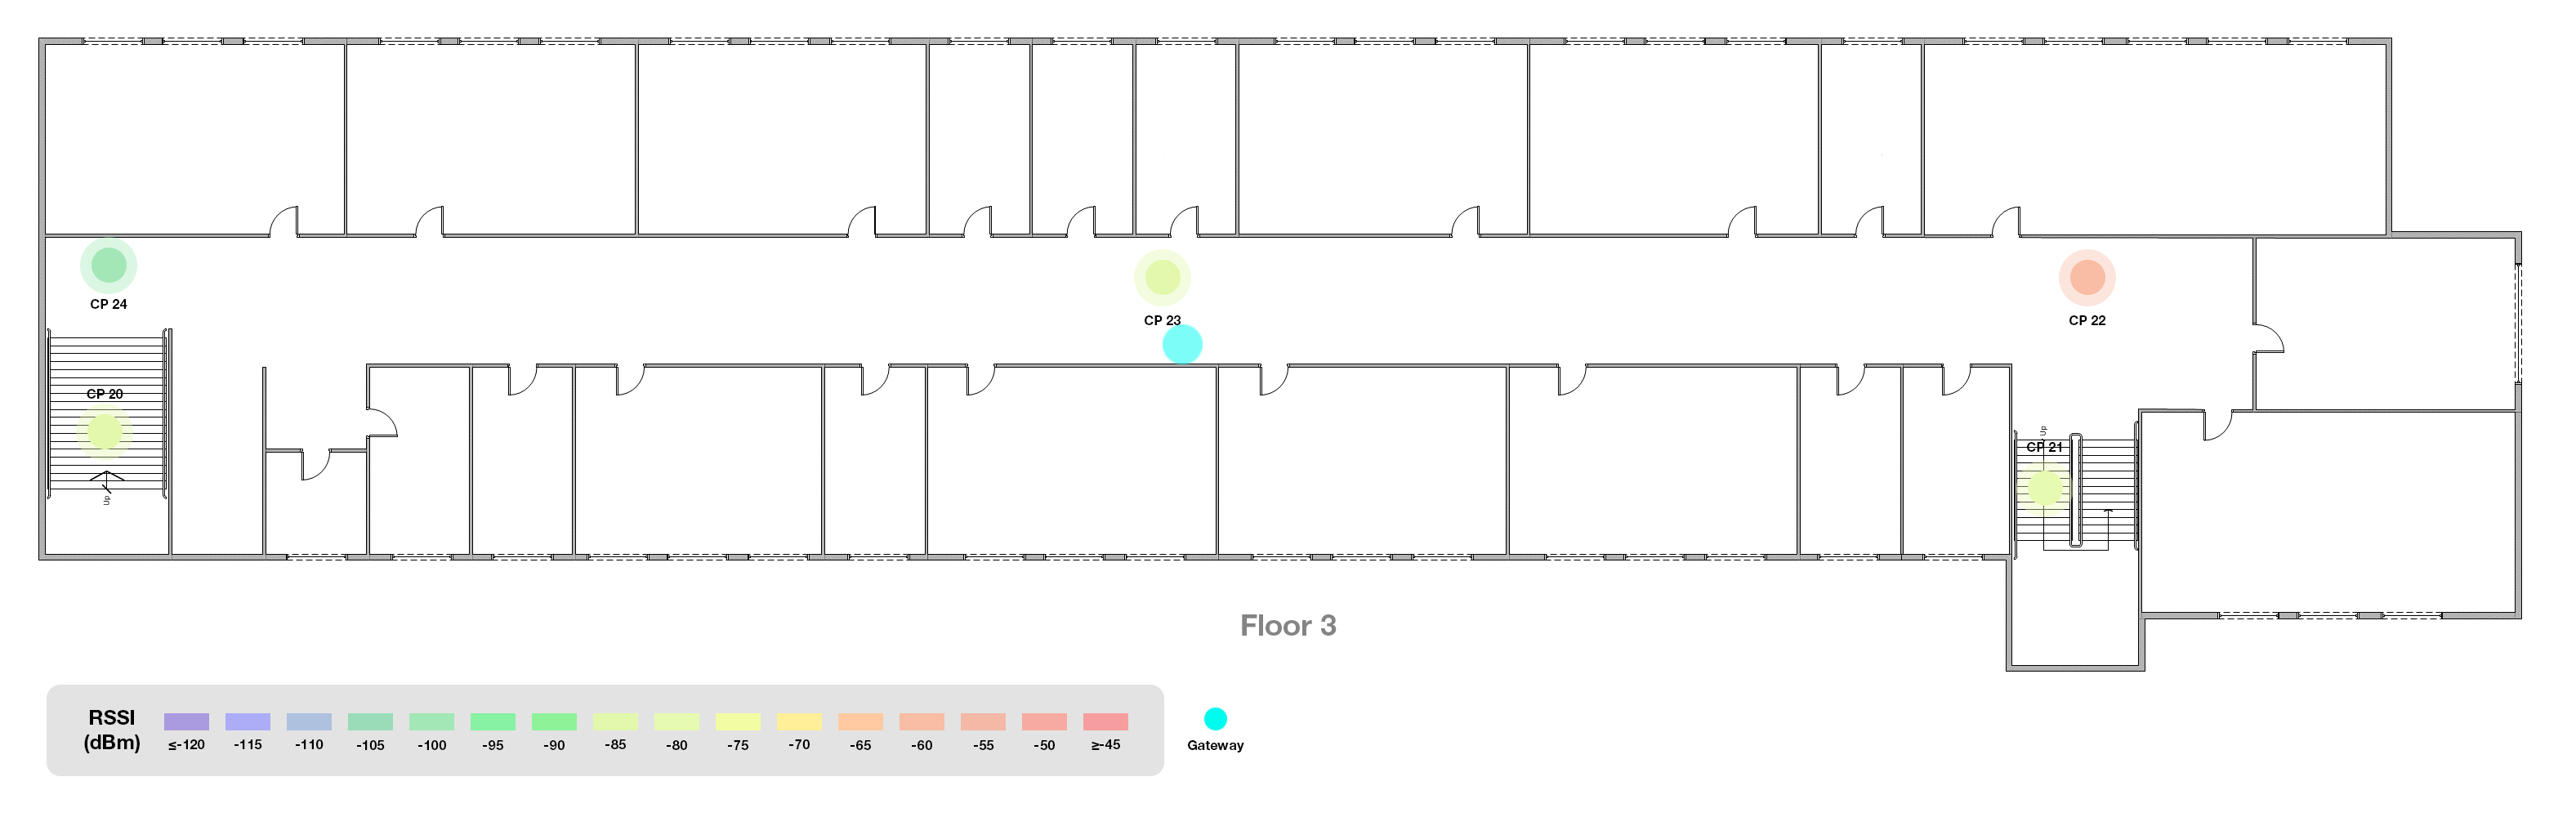  A LoRaWAN Experiment on Signal Mapping in a Building